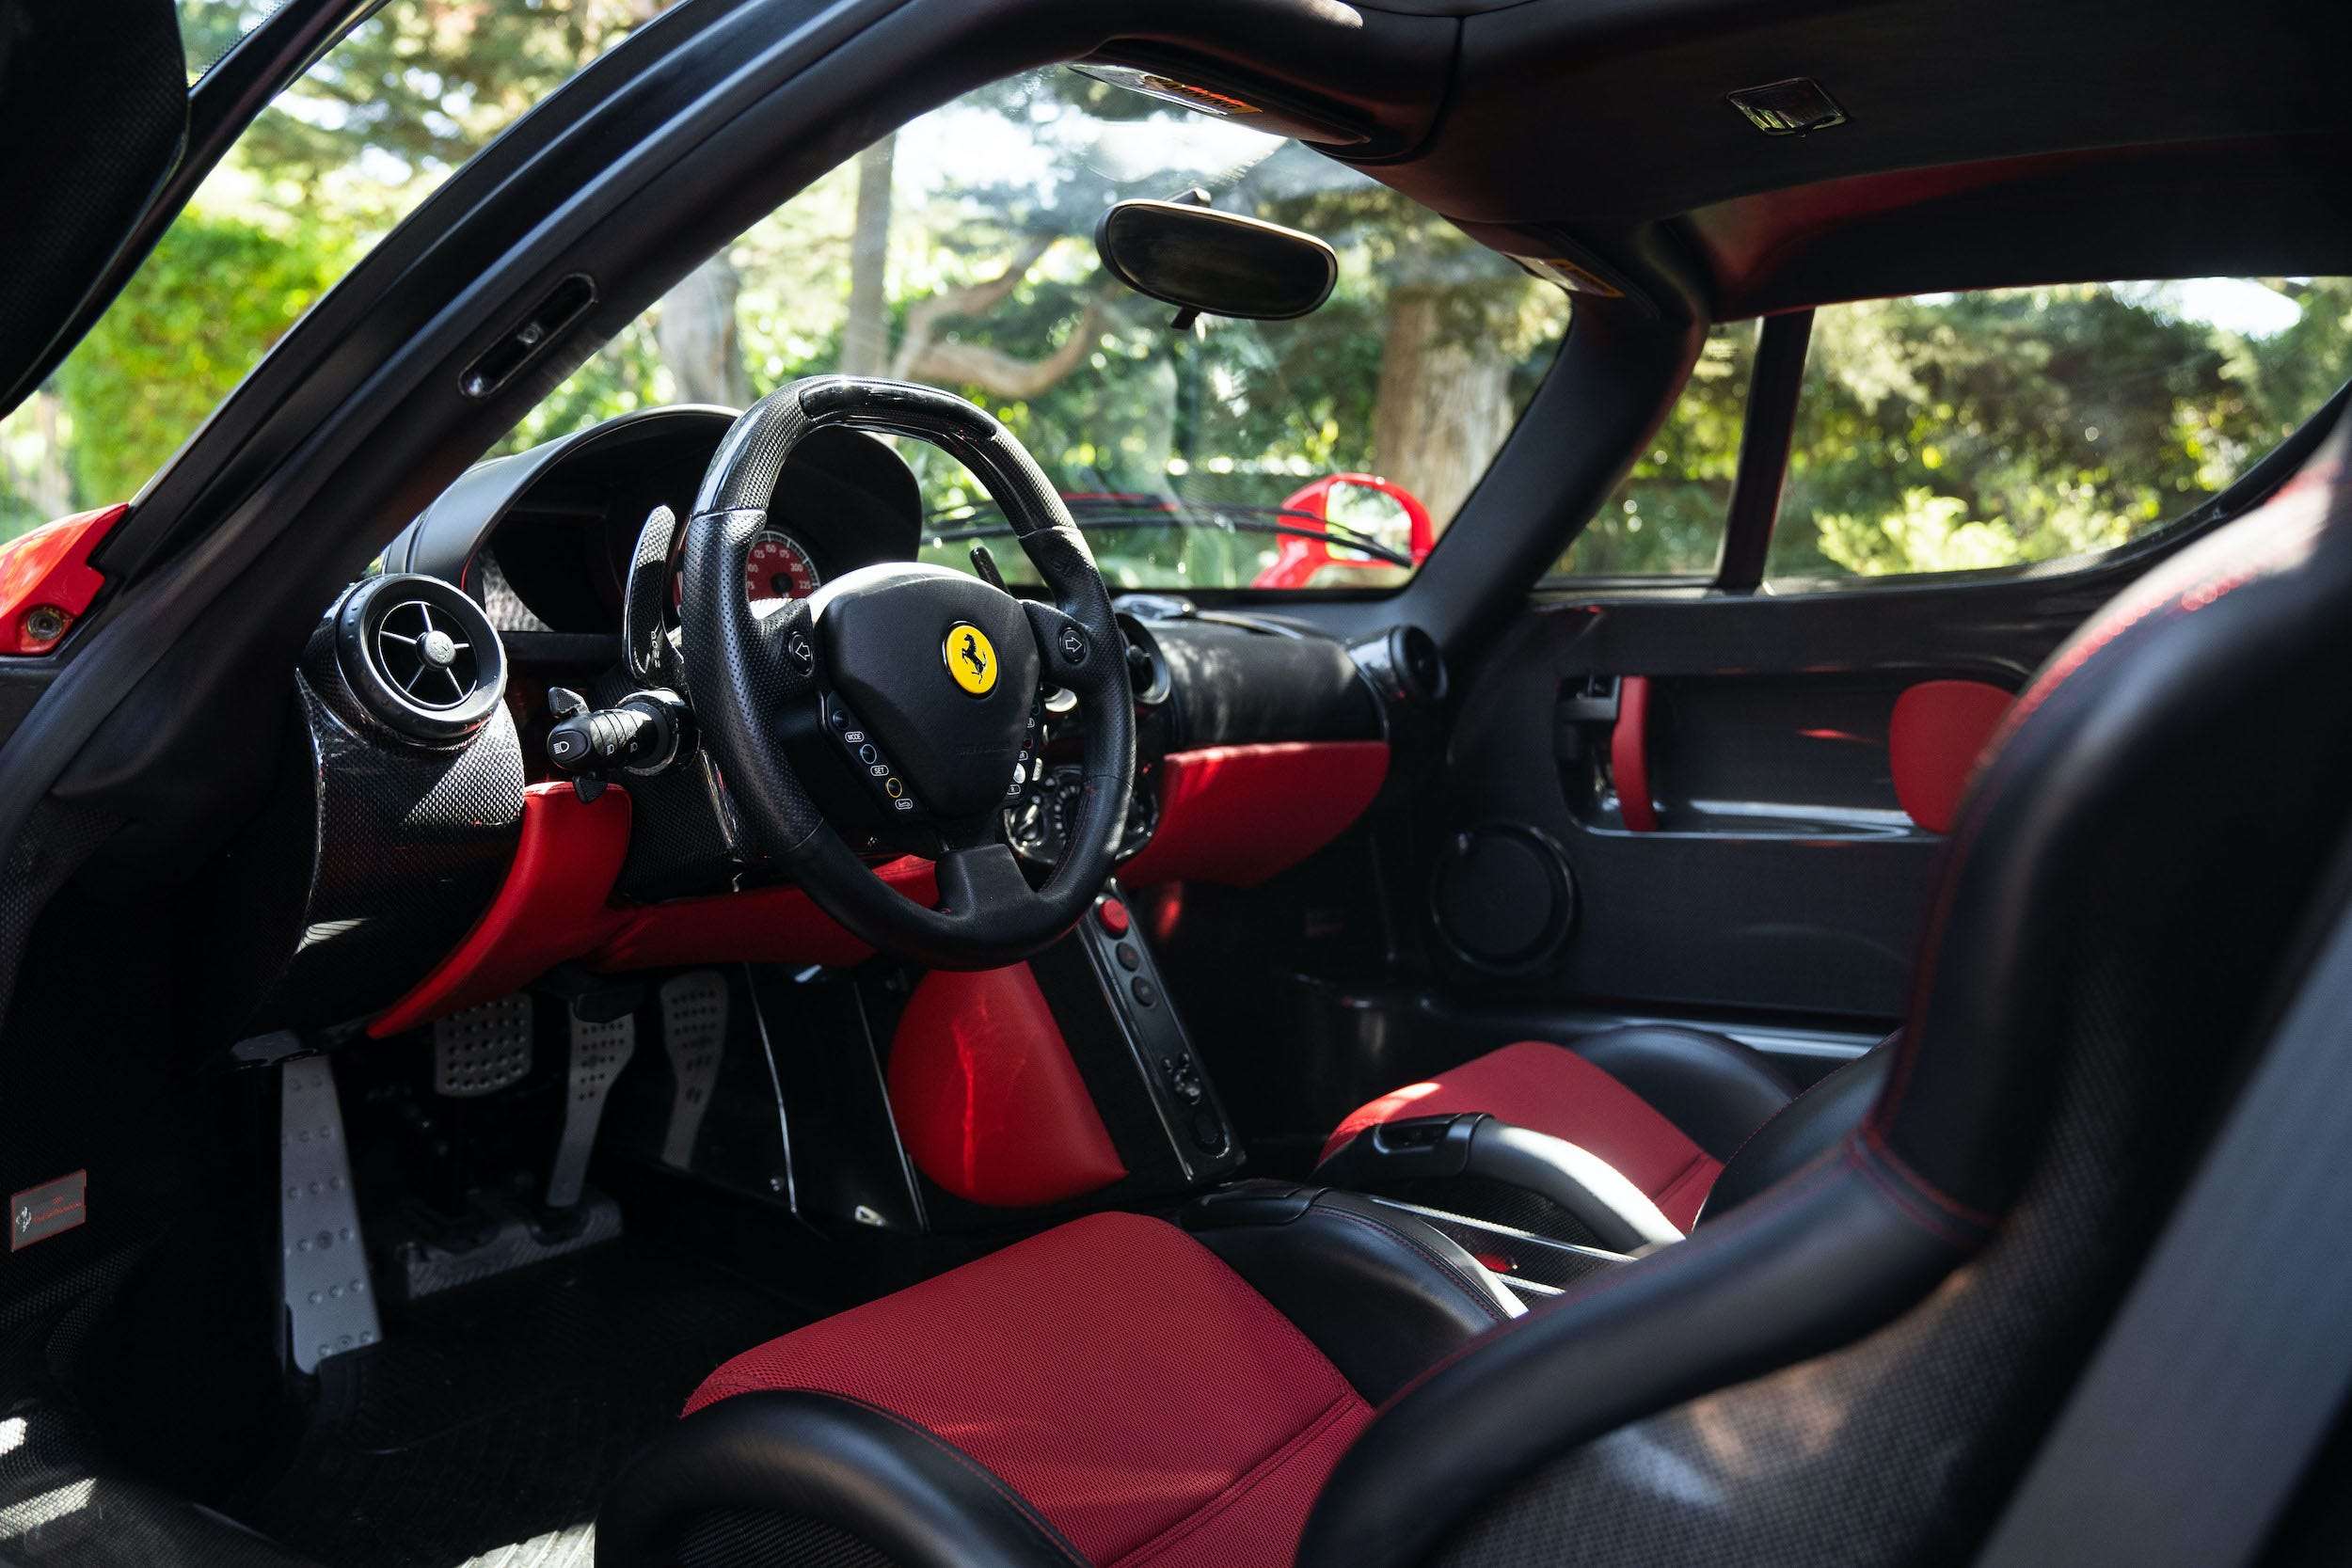 Inside the world's greatest car collection - meet the racing fan with TWO  £58million Ferraris